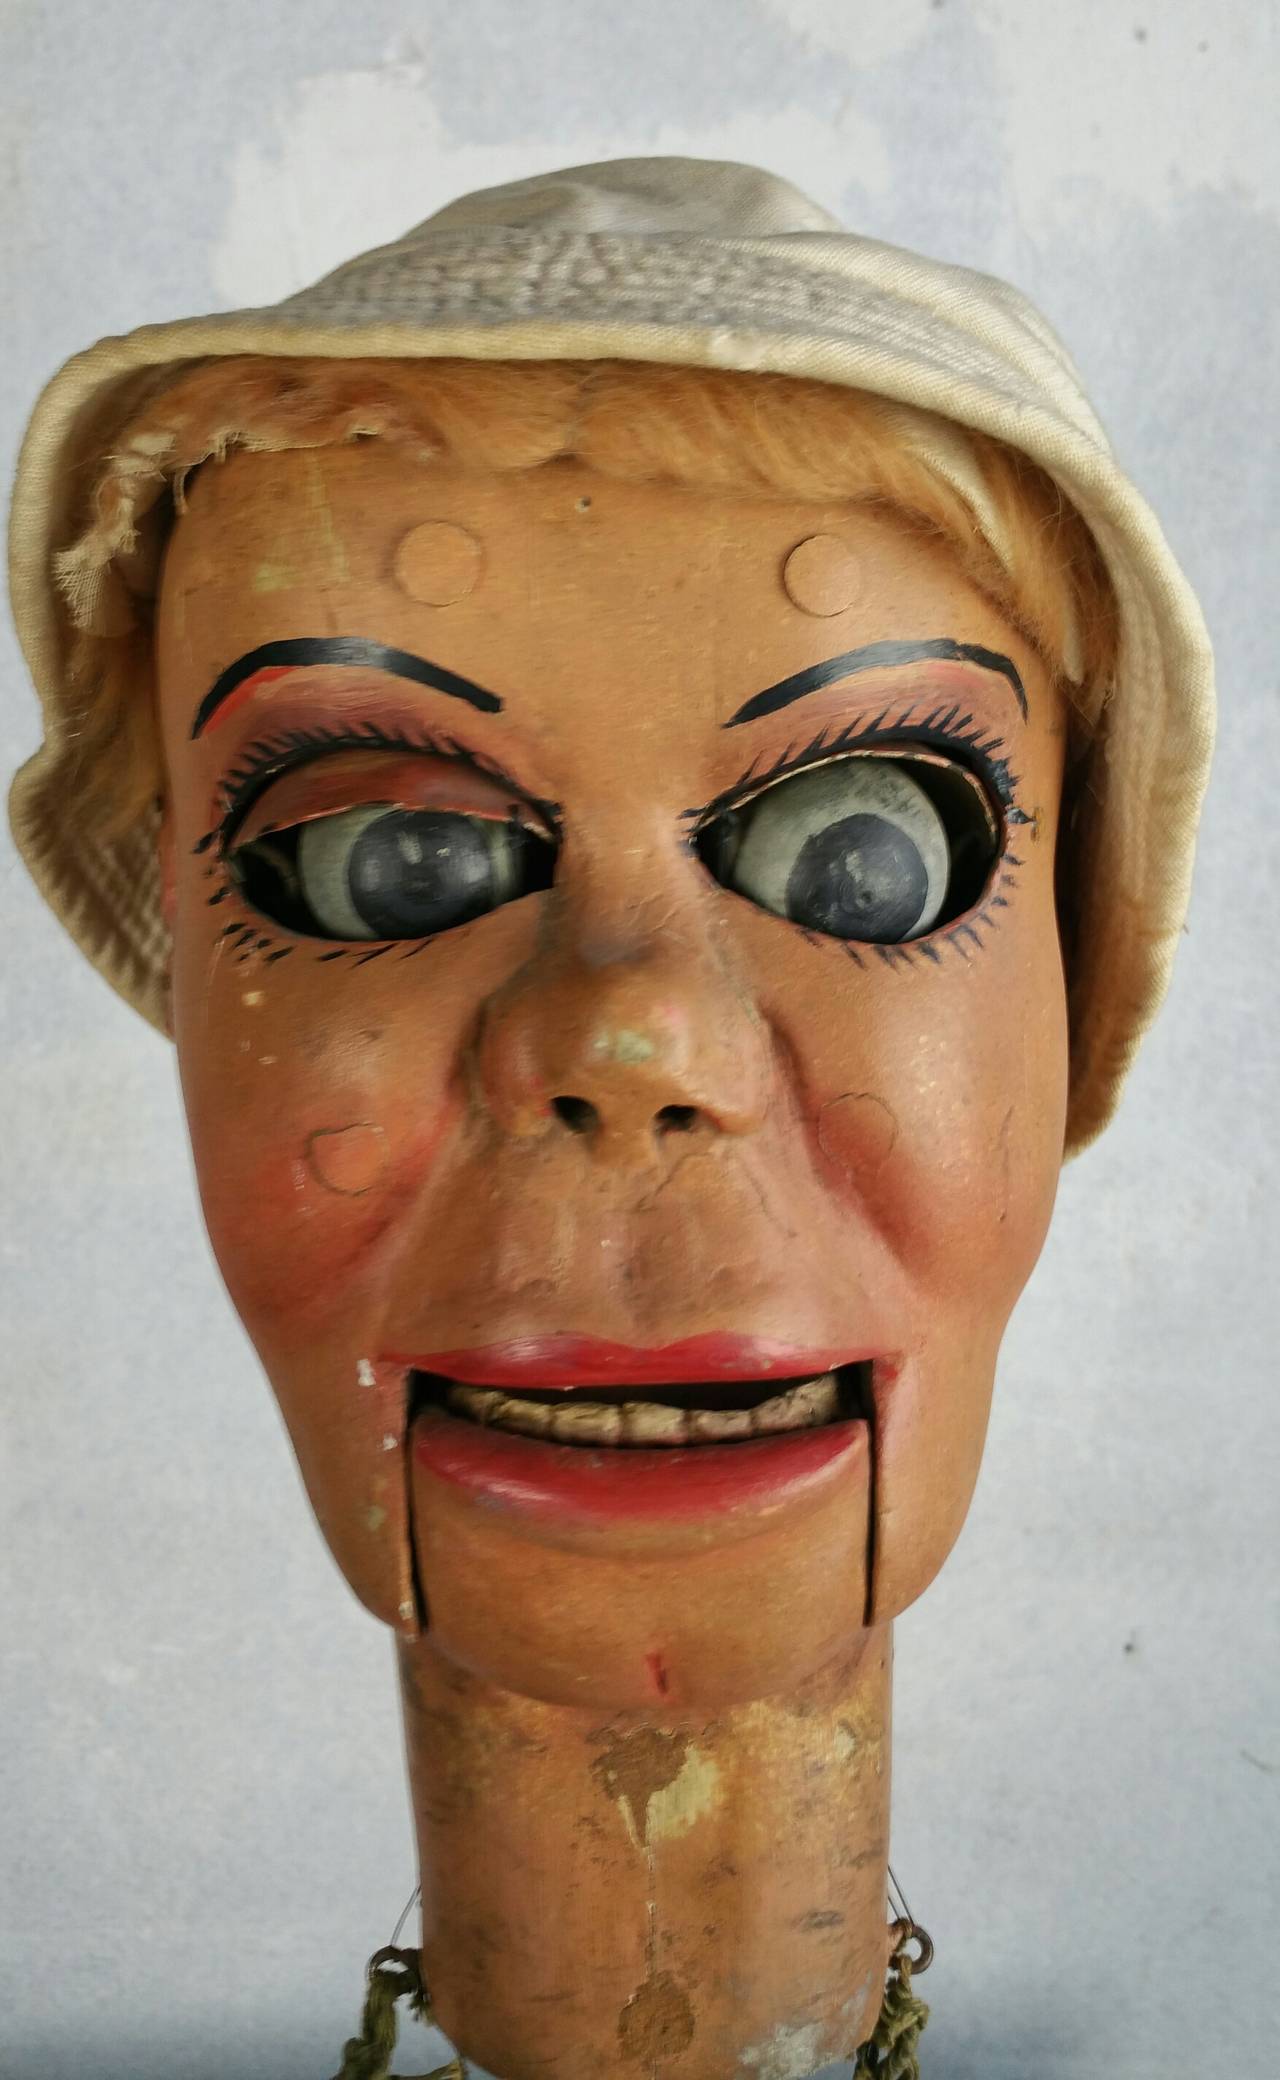 ventriloquist dummy with moving eyes